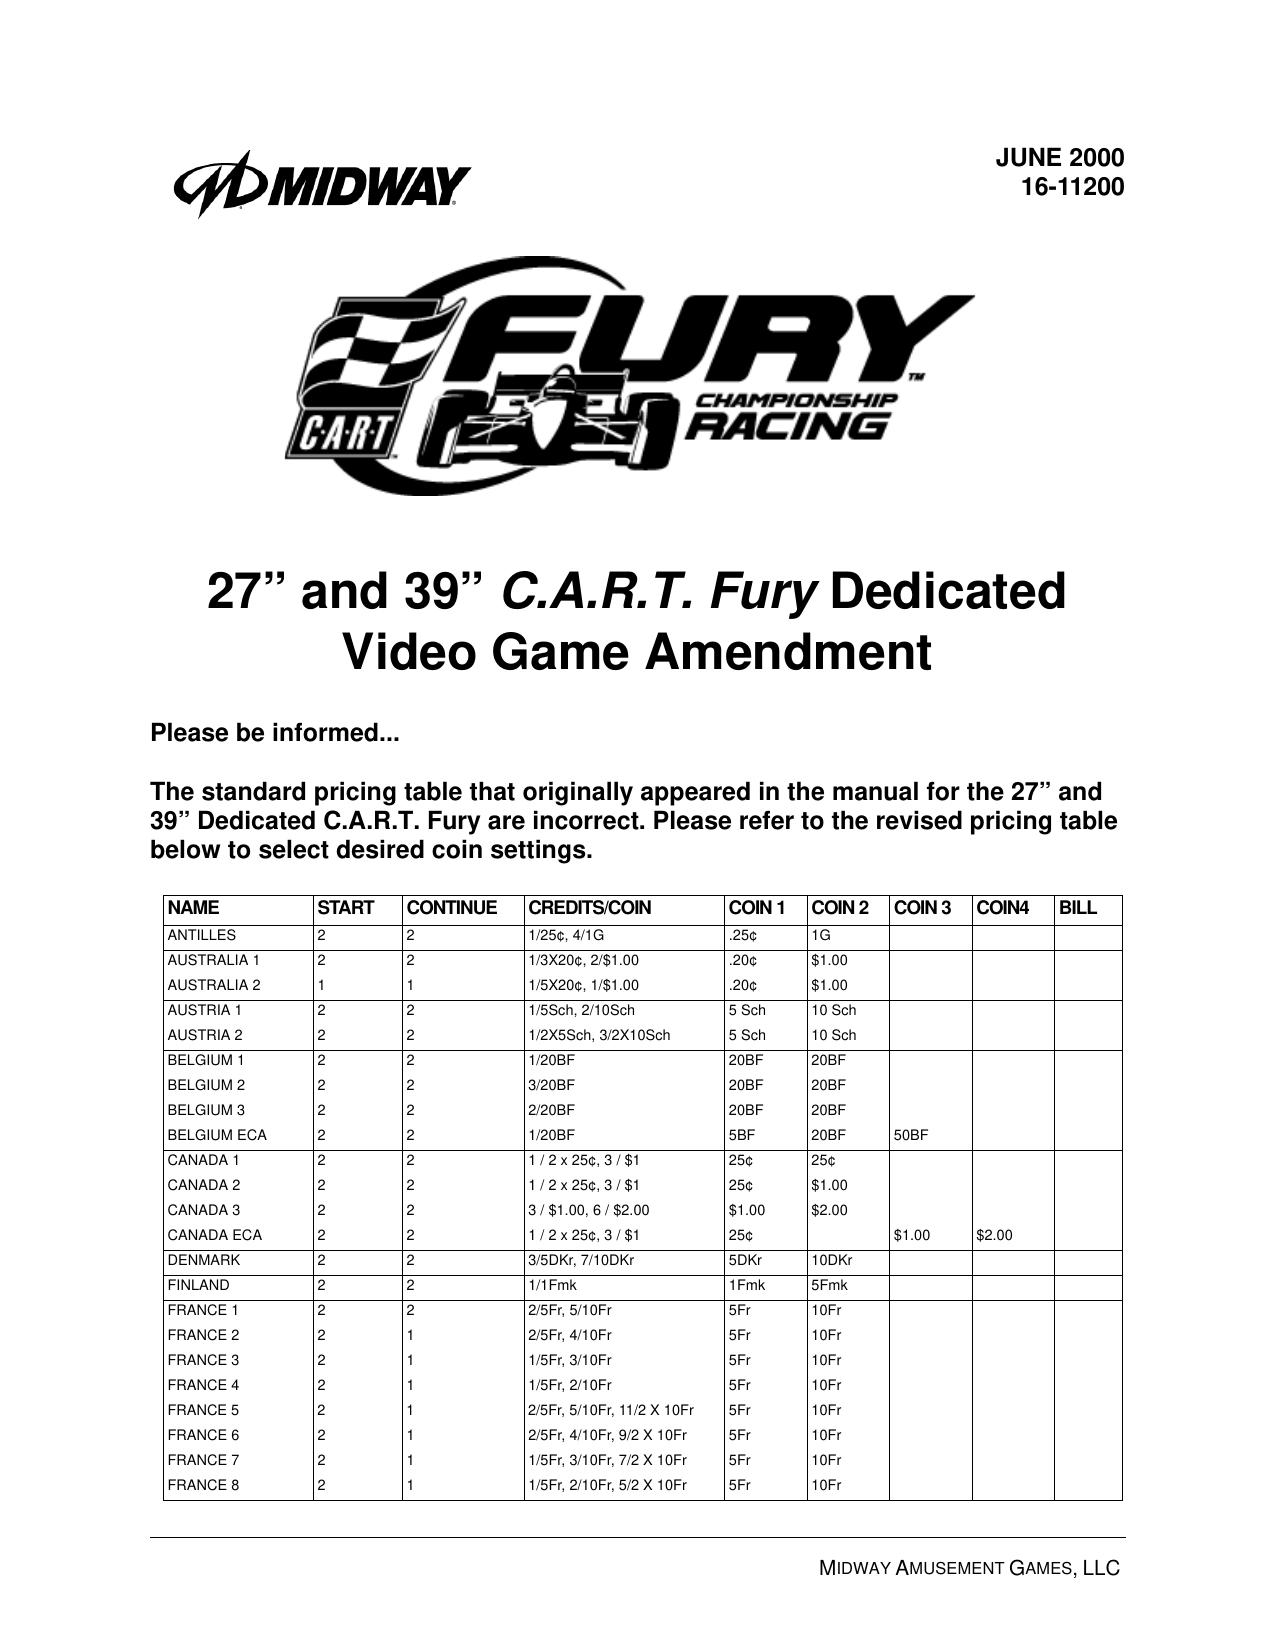 Cart Fury Dedicated 27in and 39in Amendment